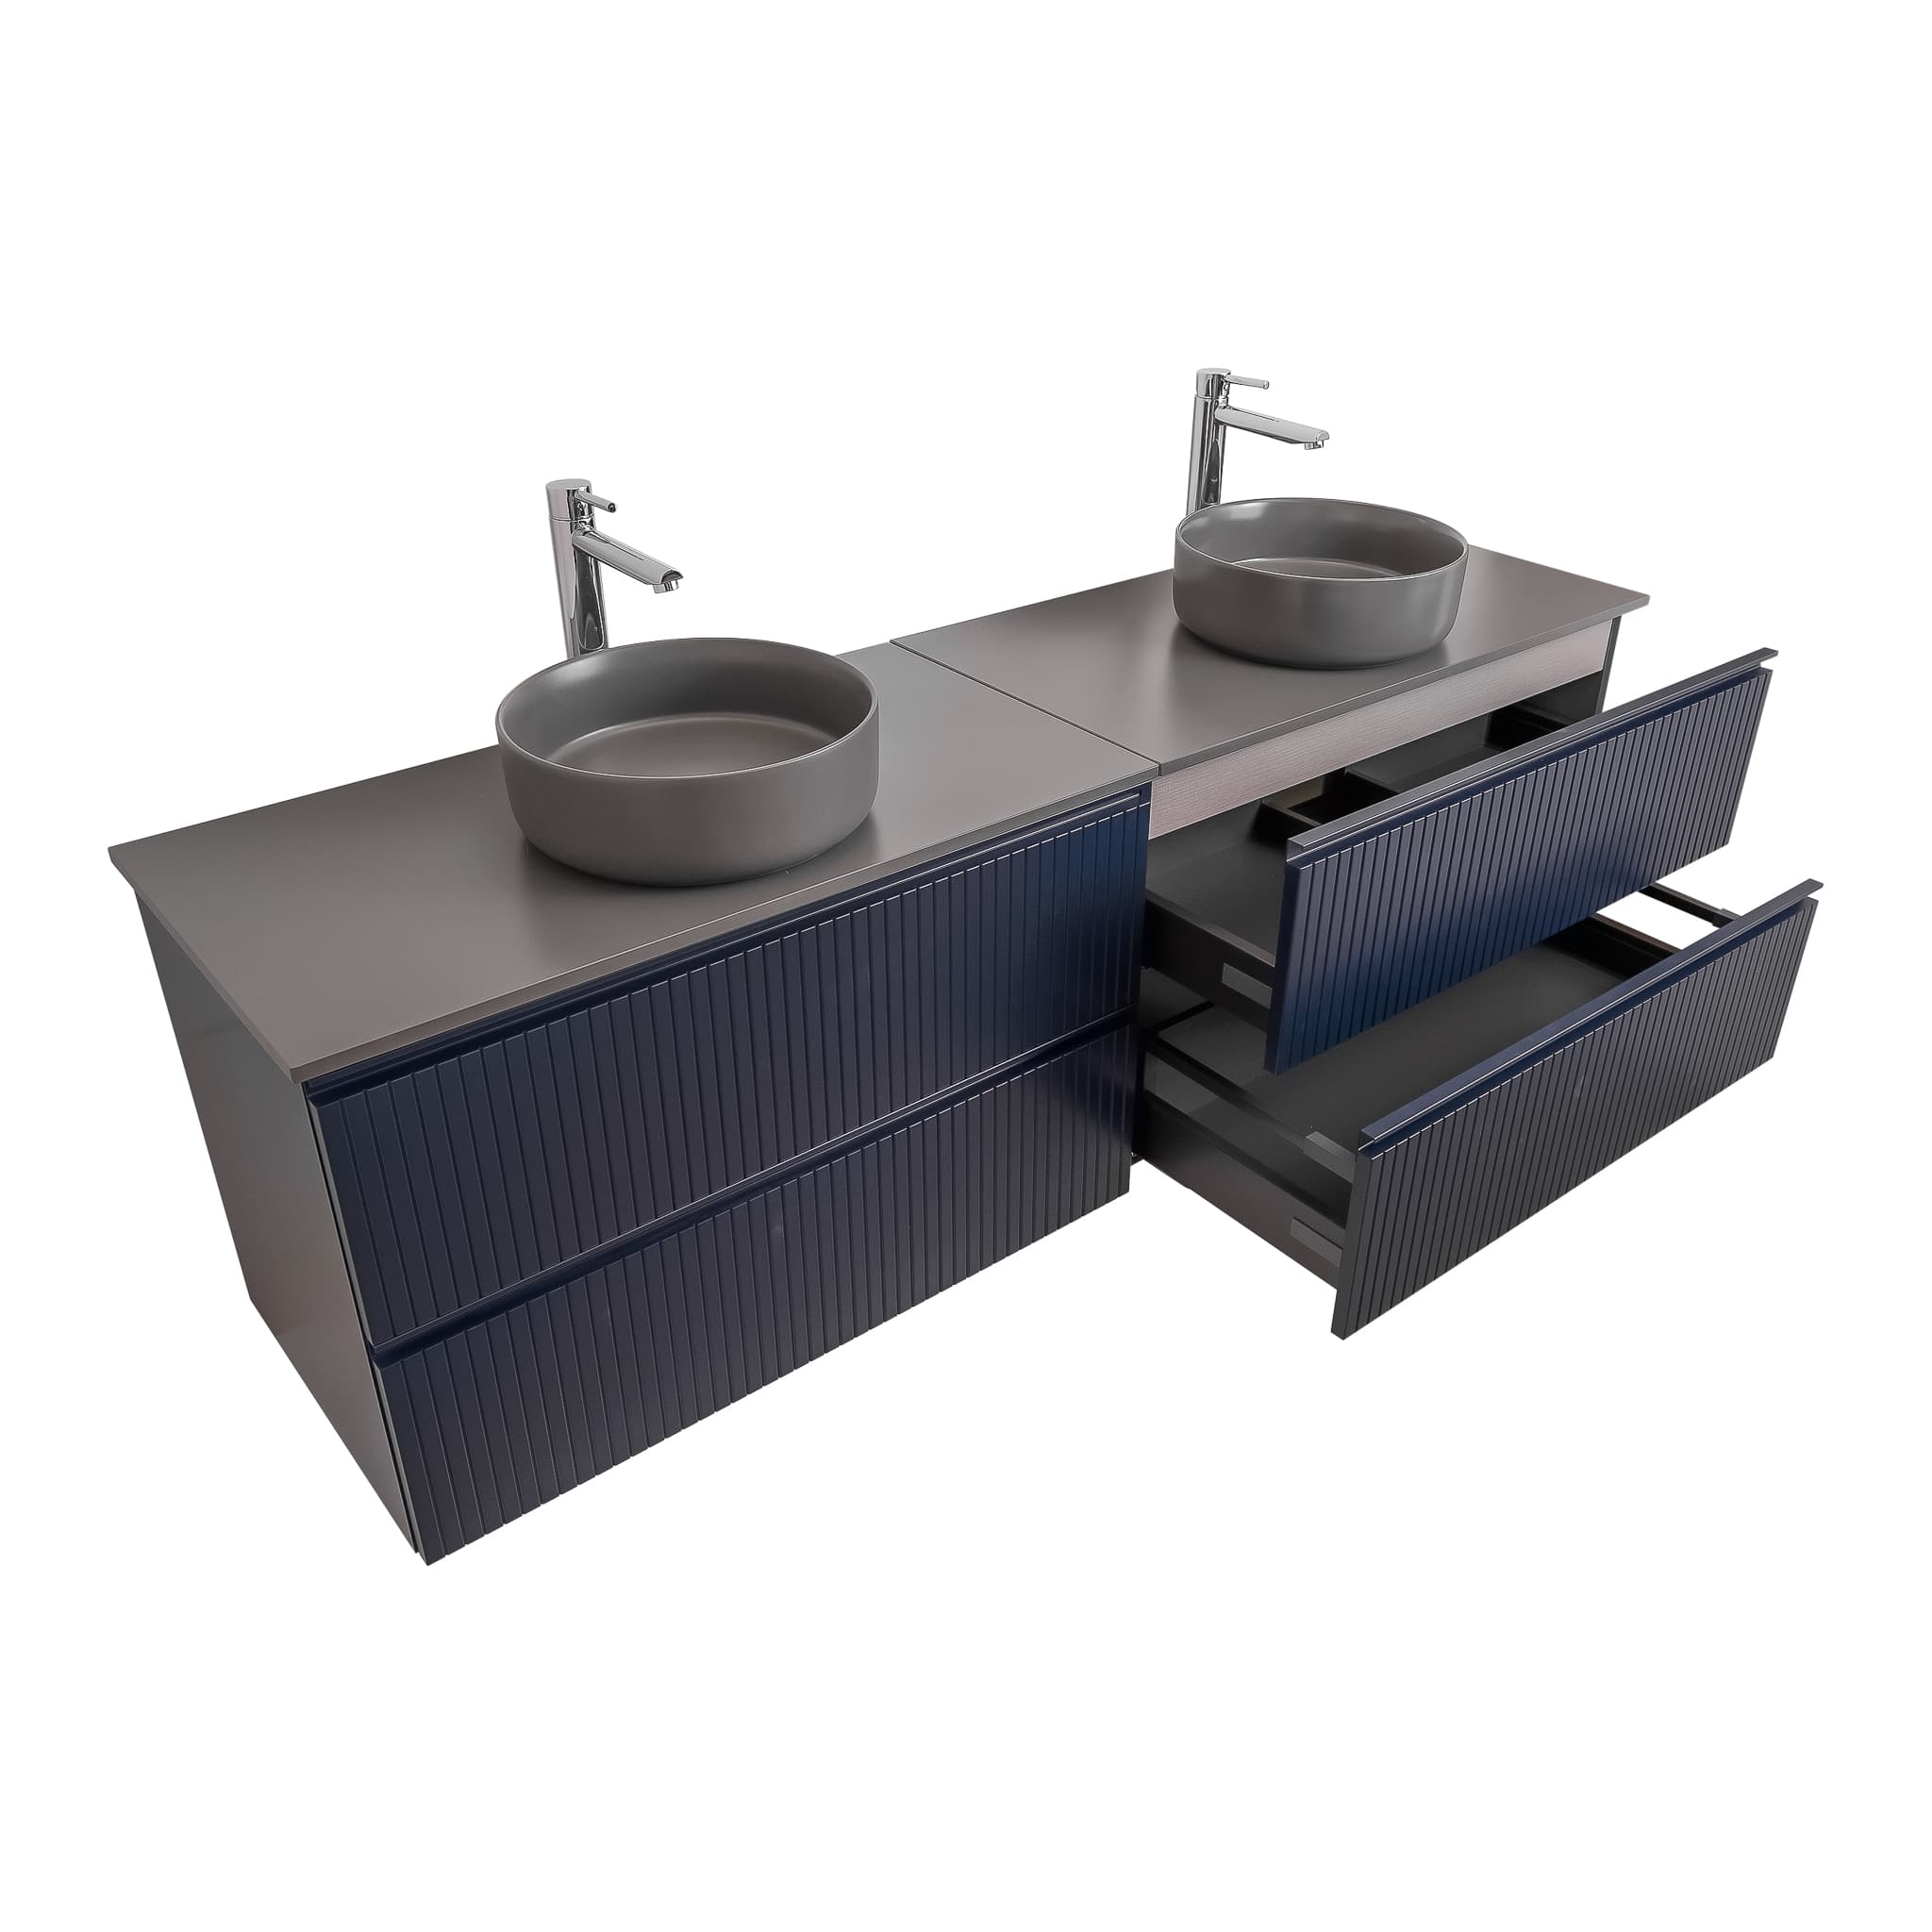 Ares 72 Matte Navy Blue Cabinet, Ares Grey Ceniza Top And Two Ares Grey Ceniza Ceramic Basin, Wall Mounted Modern Vanity Set